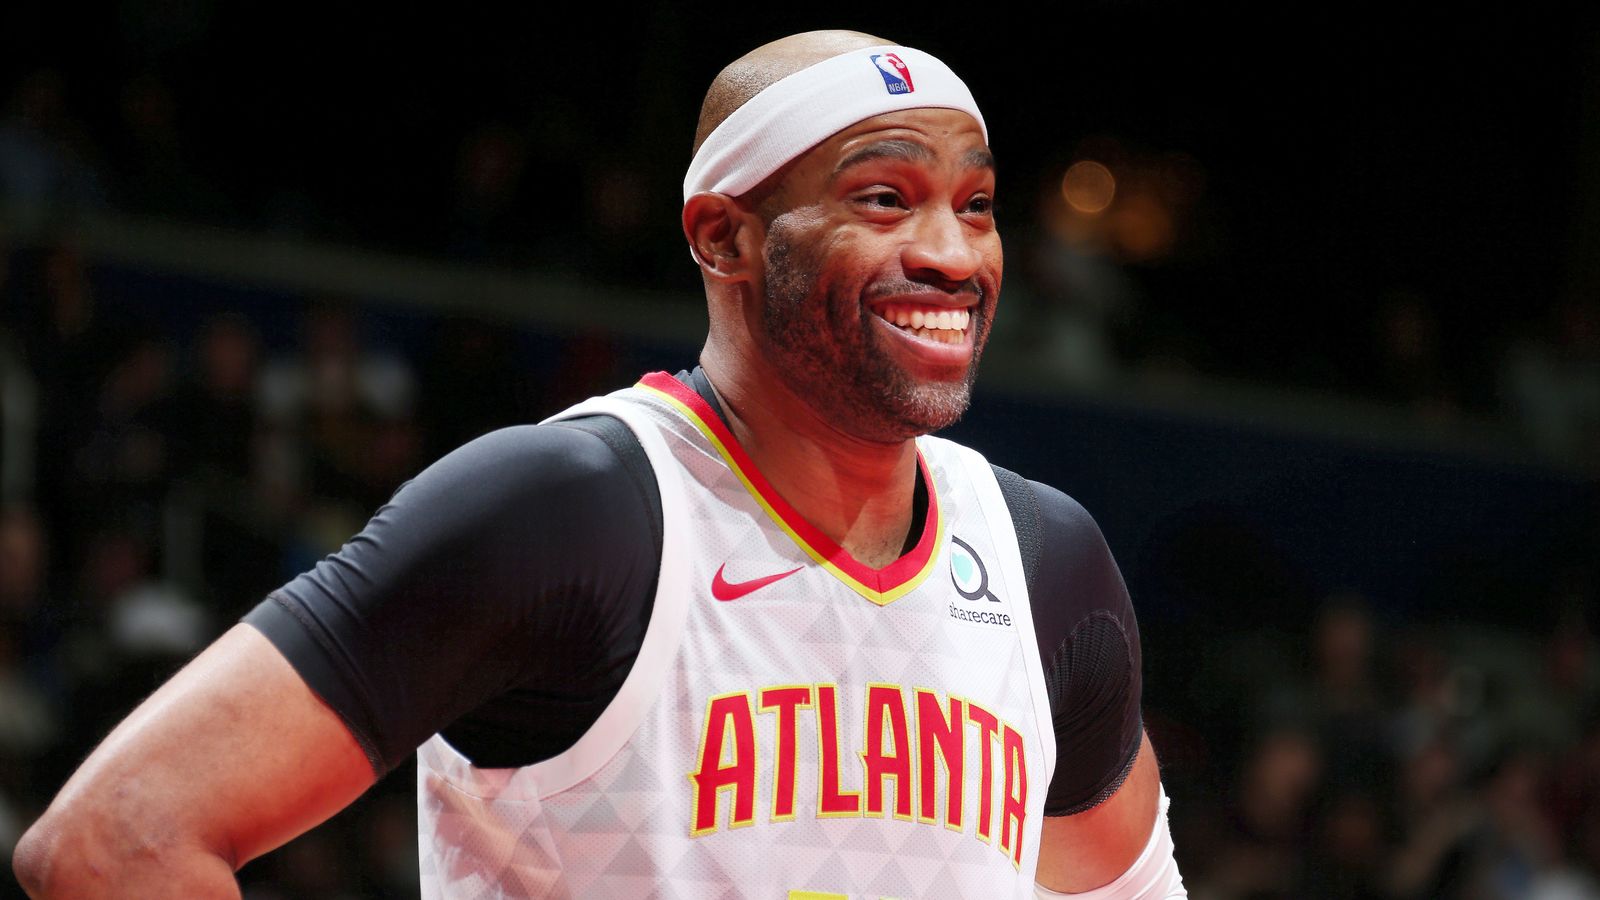 Vince Carter set to break NBA record for most seasons